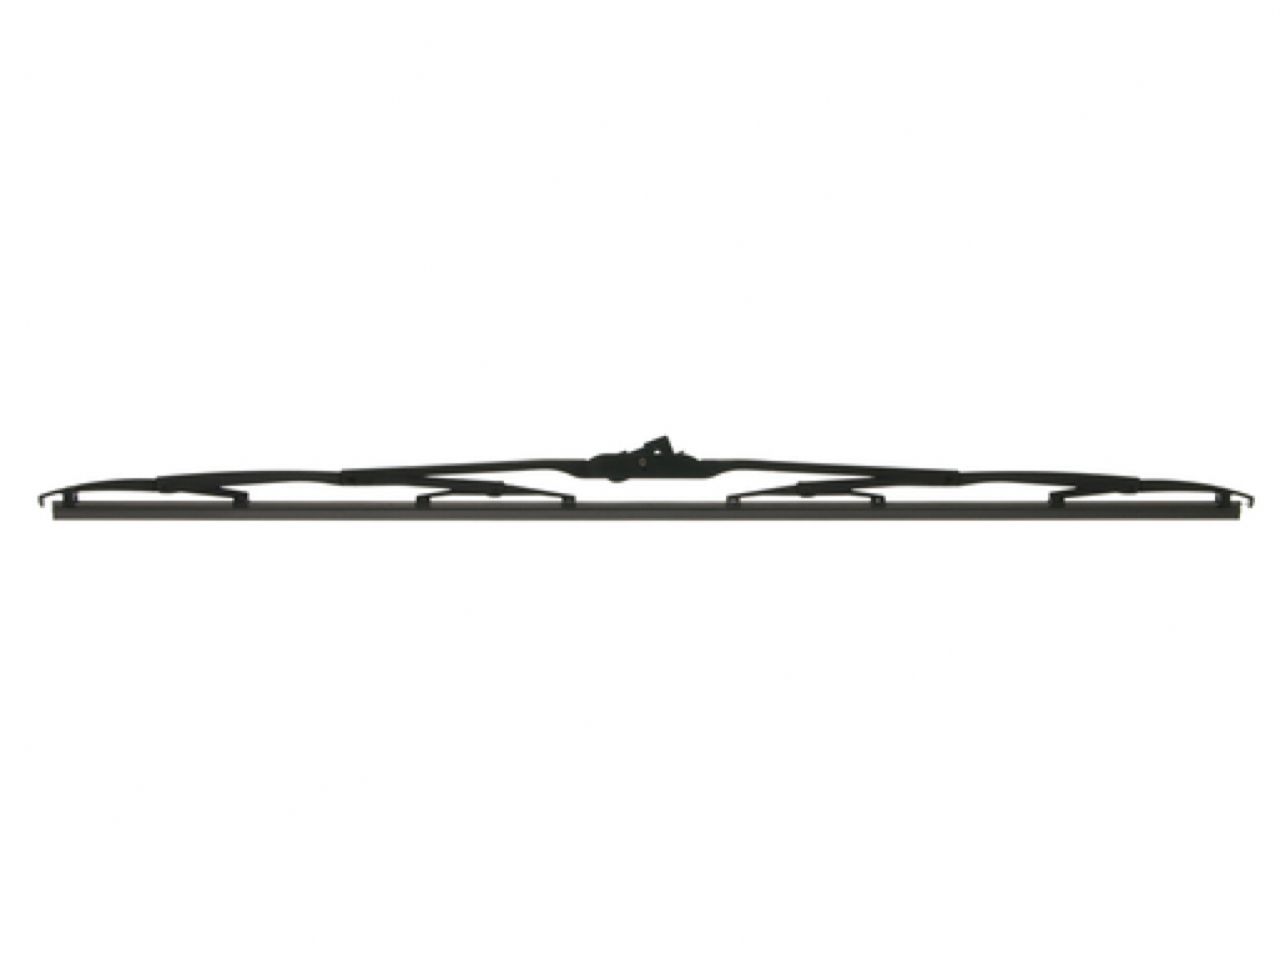 Anco Windshield Wipers 31-28 Item Image